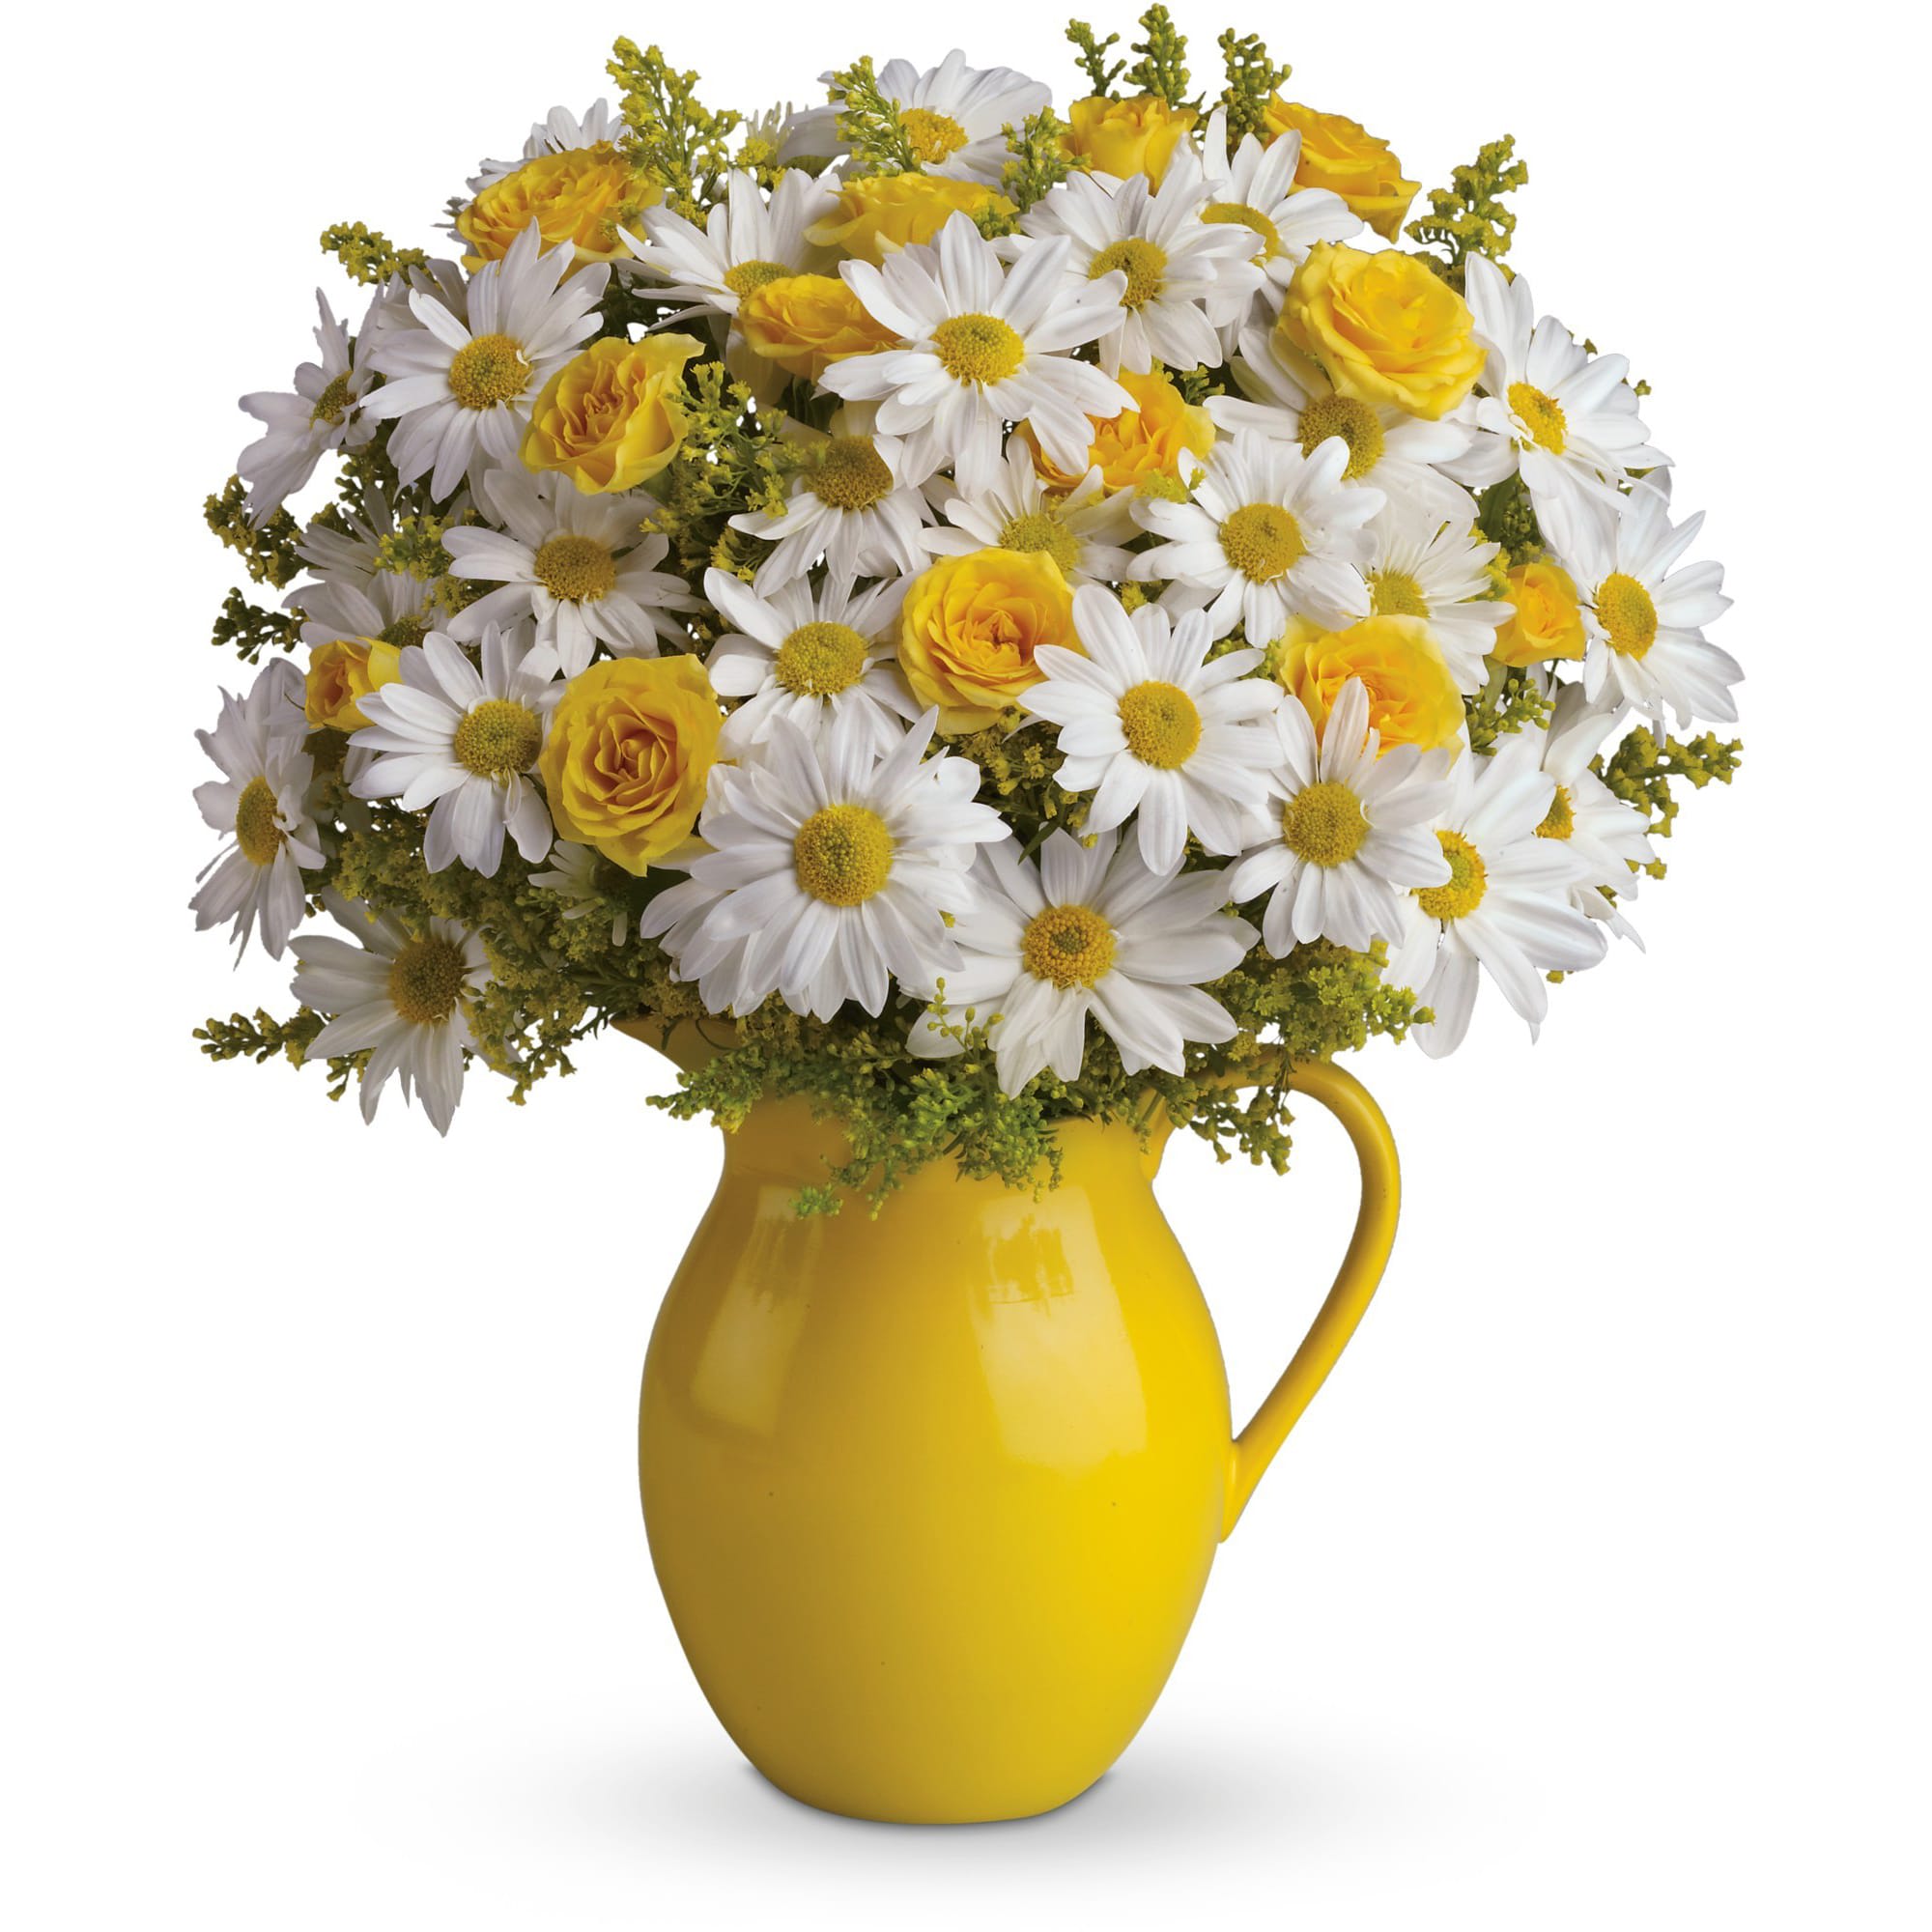 Teleflora's Sunny Day Pitcher of Daisies Deluxe - Picture someone receiving this sunny pitcher of daisies! It's so bright and full of warmth, it's guaranteed to make them smile. Besides being the perfect bouquet for any occasion, the dazzling yellow ceramic pitcher can be used and enjoyed for years to come.  